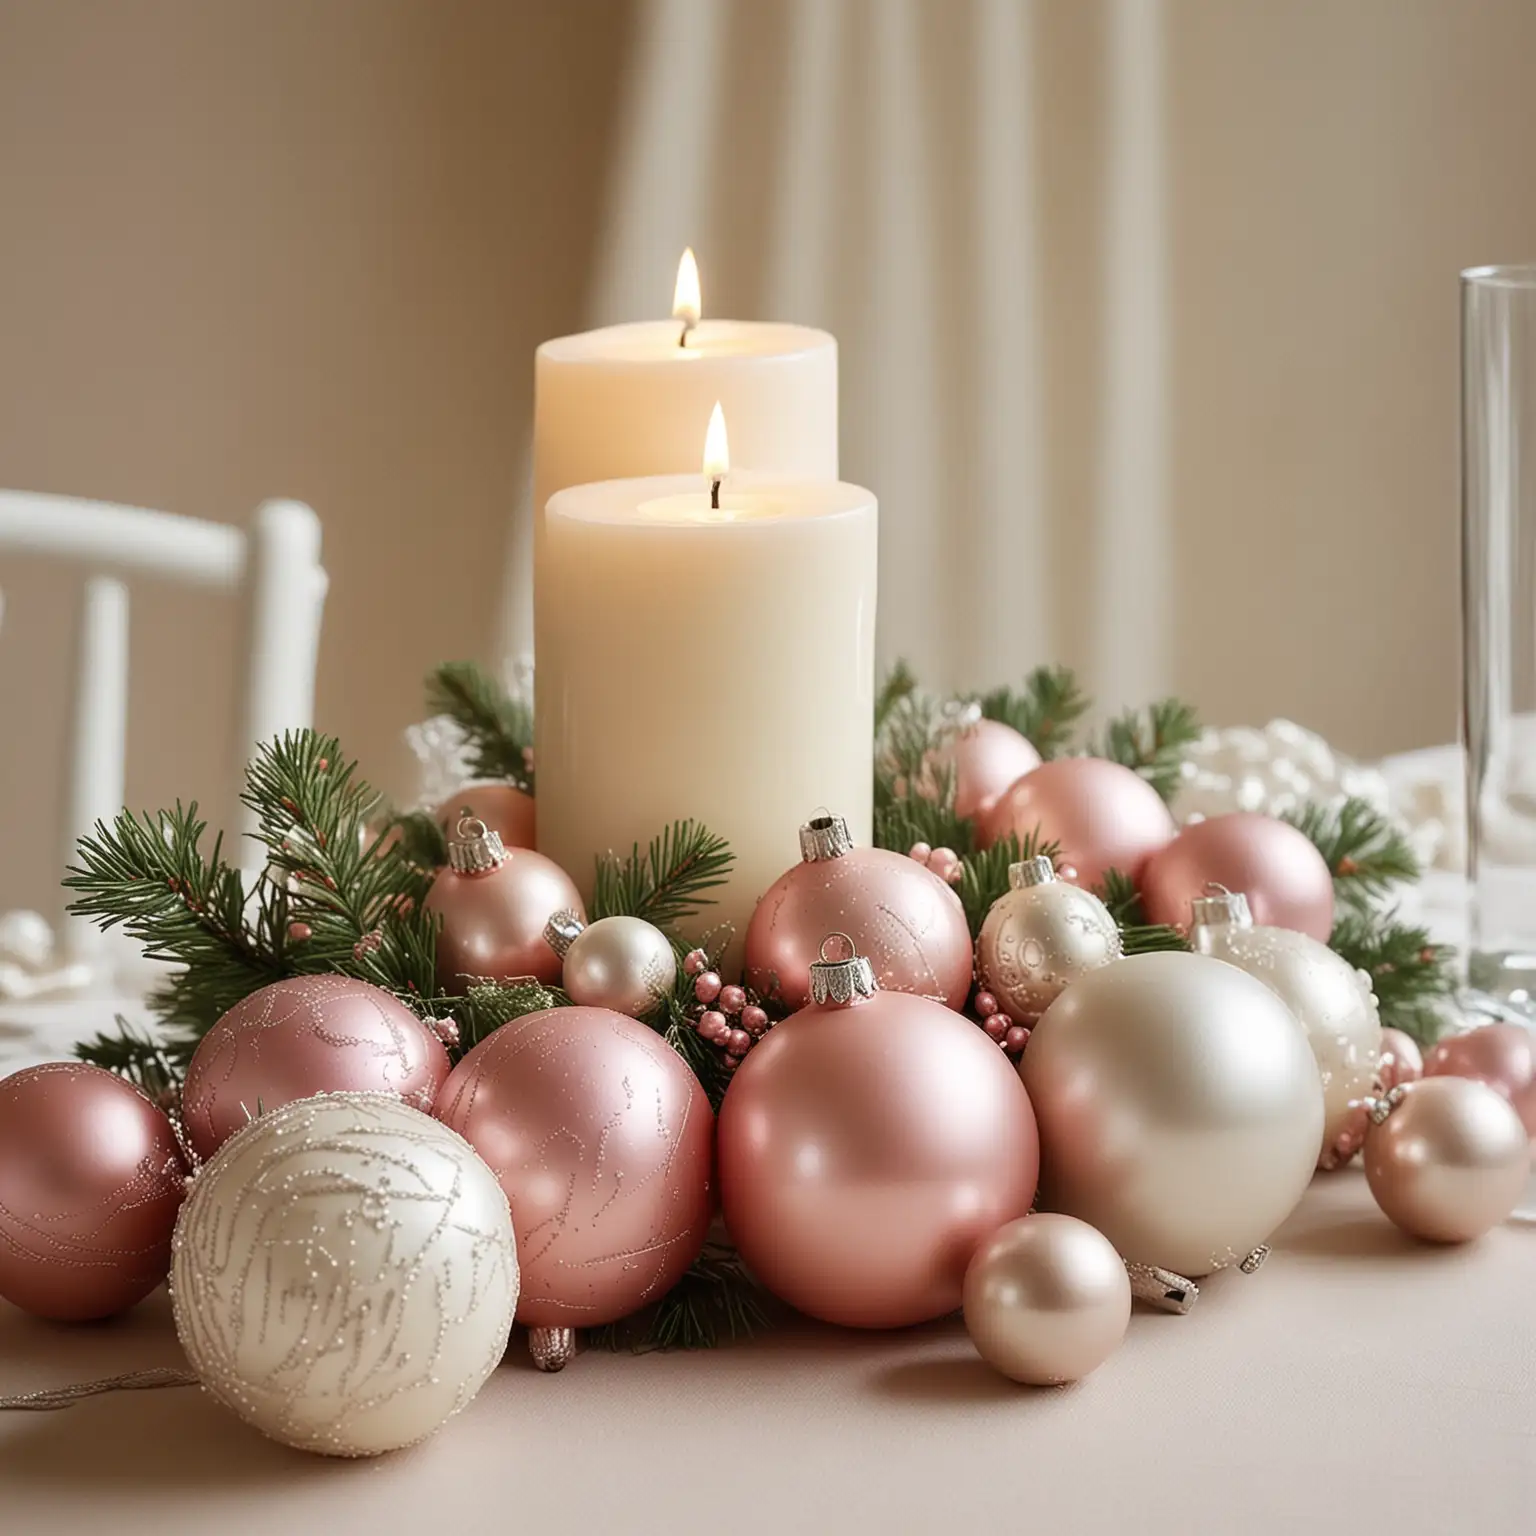 simple elegant winter wedding centerpiece with cream and blush pink ornaments; nothing else in photo; keep background neutral